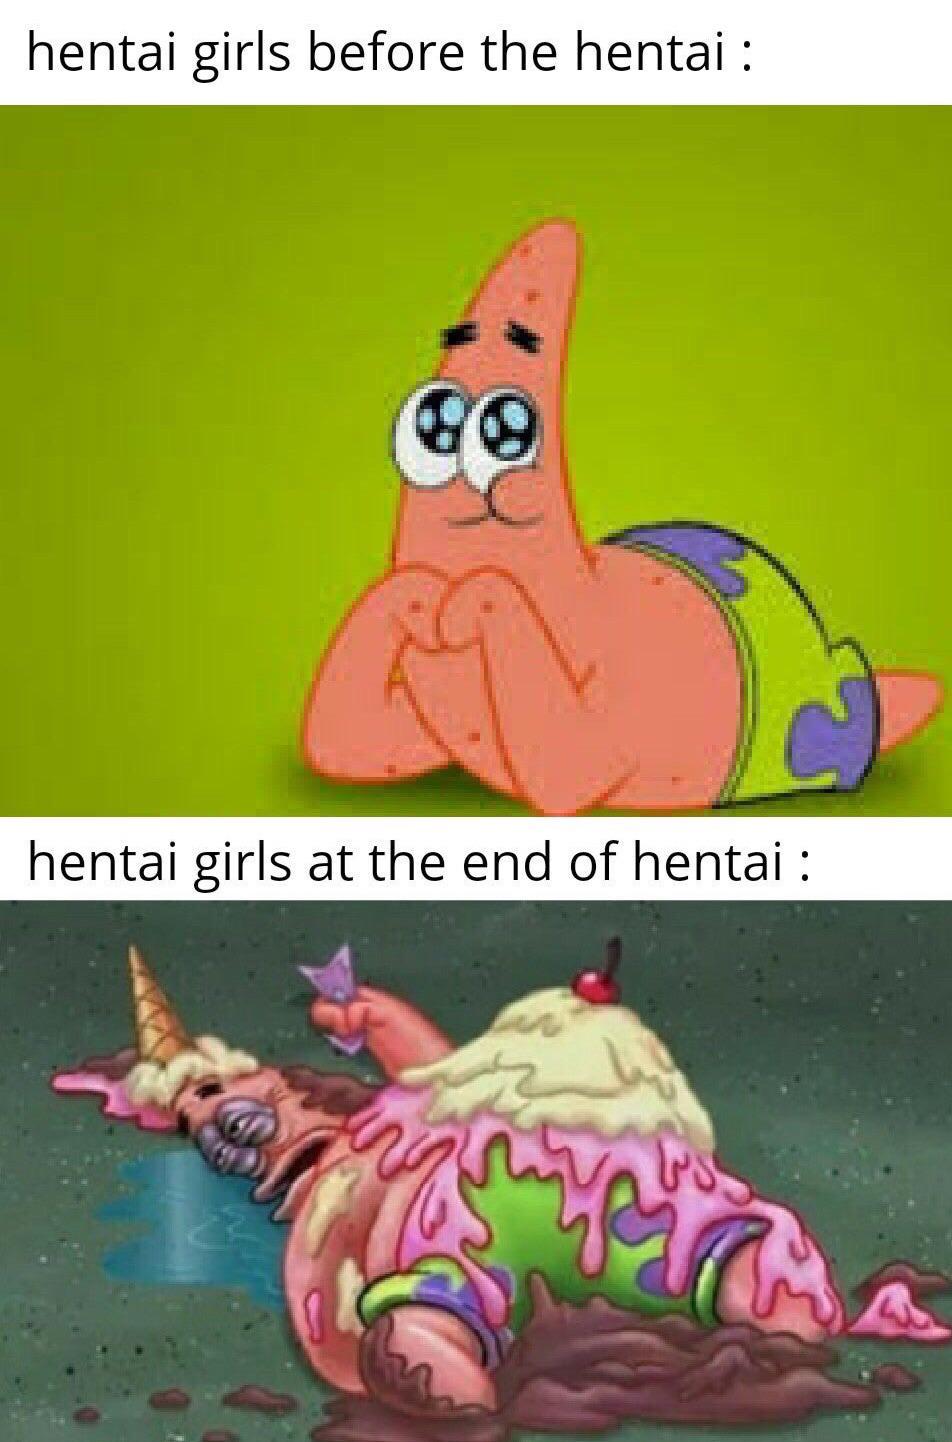 anime girls at the end of hentai - hentai girls before the hentai hentai girls at the end of hentai